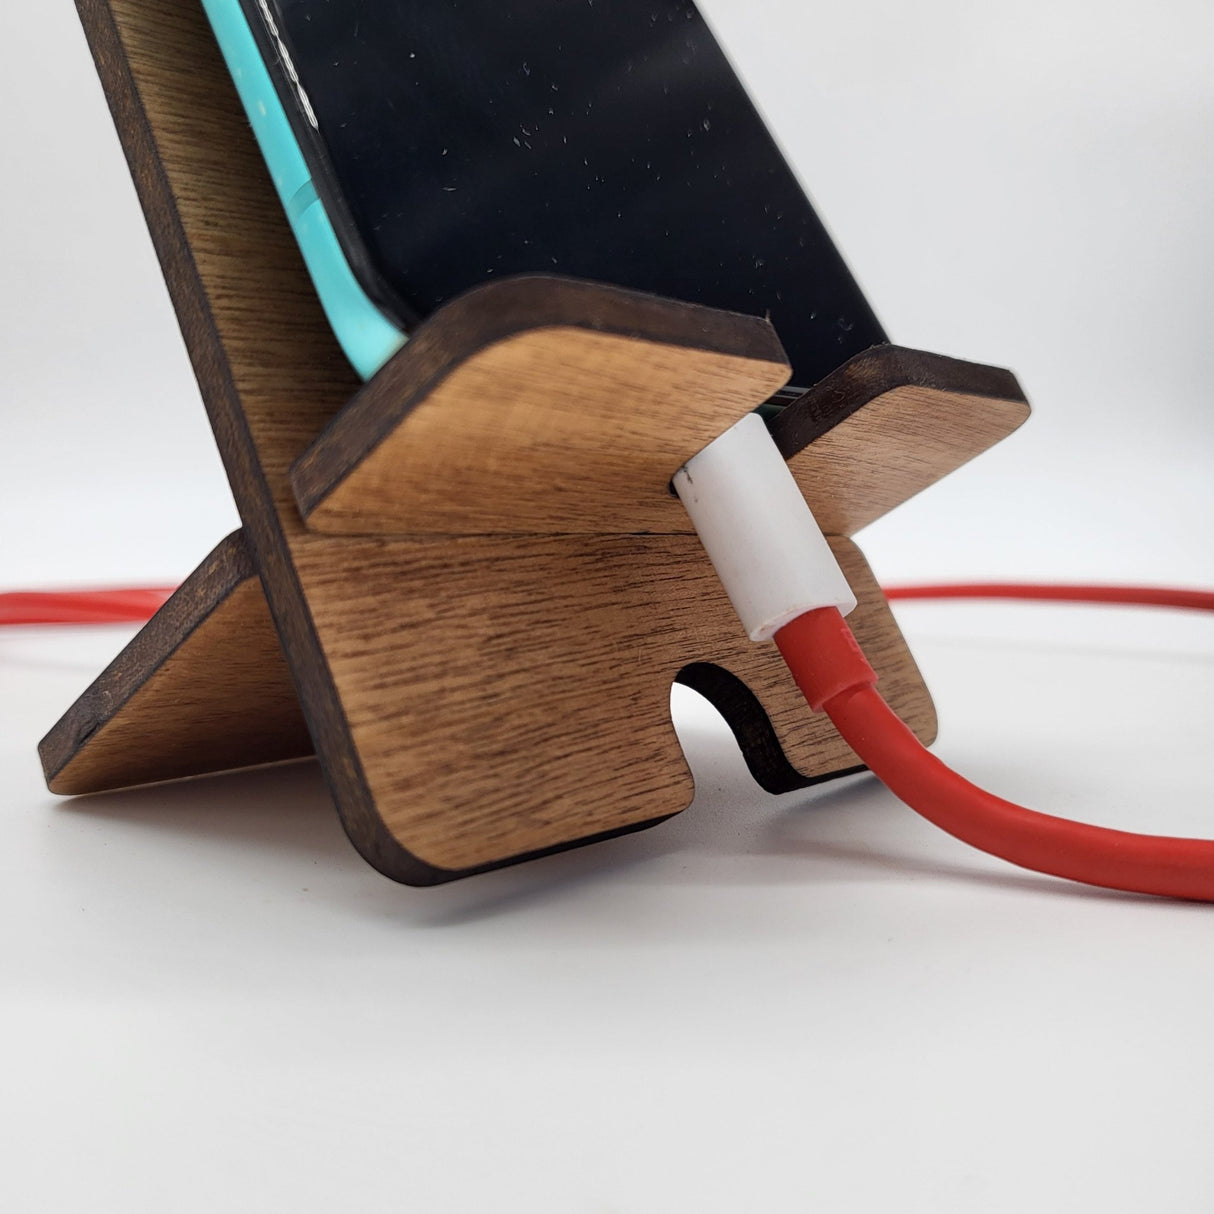 Phone Stand «Real Estate Life» - Real Estate Store